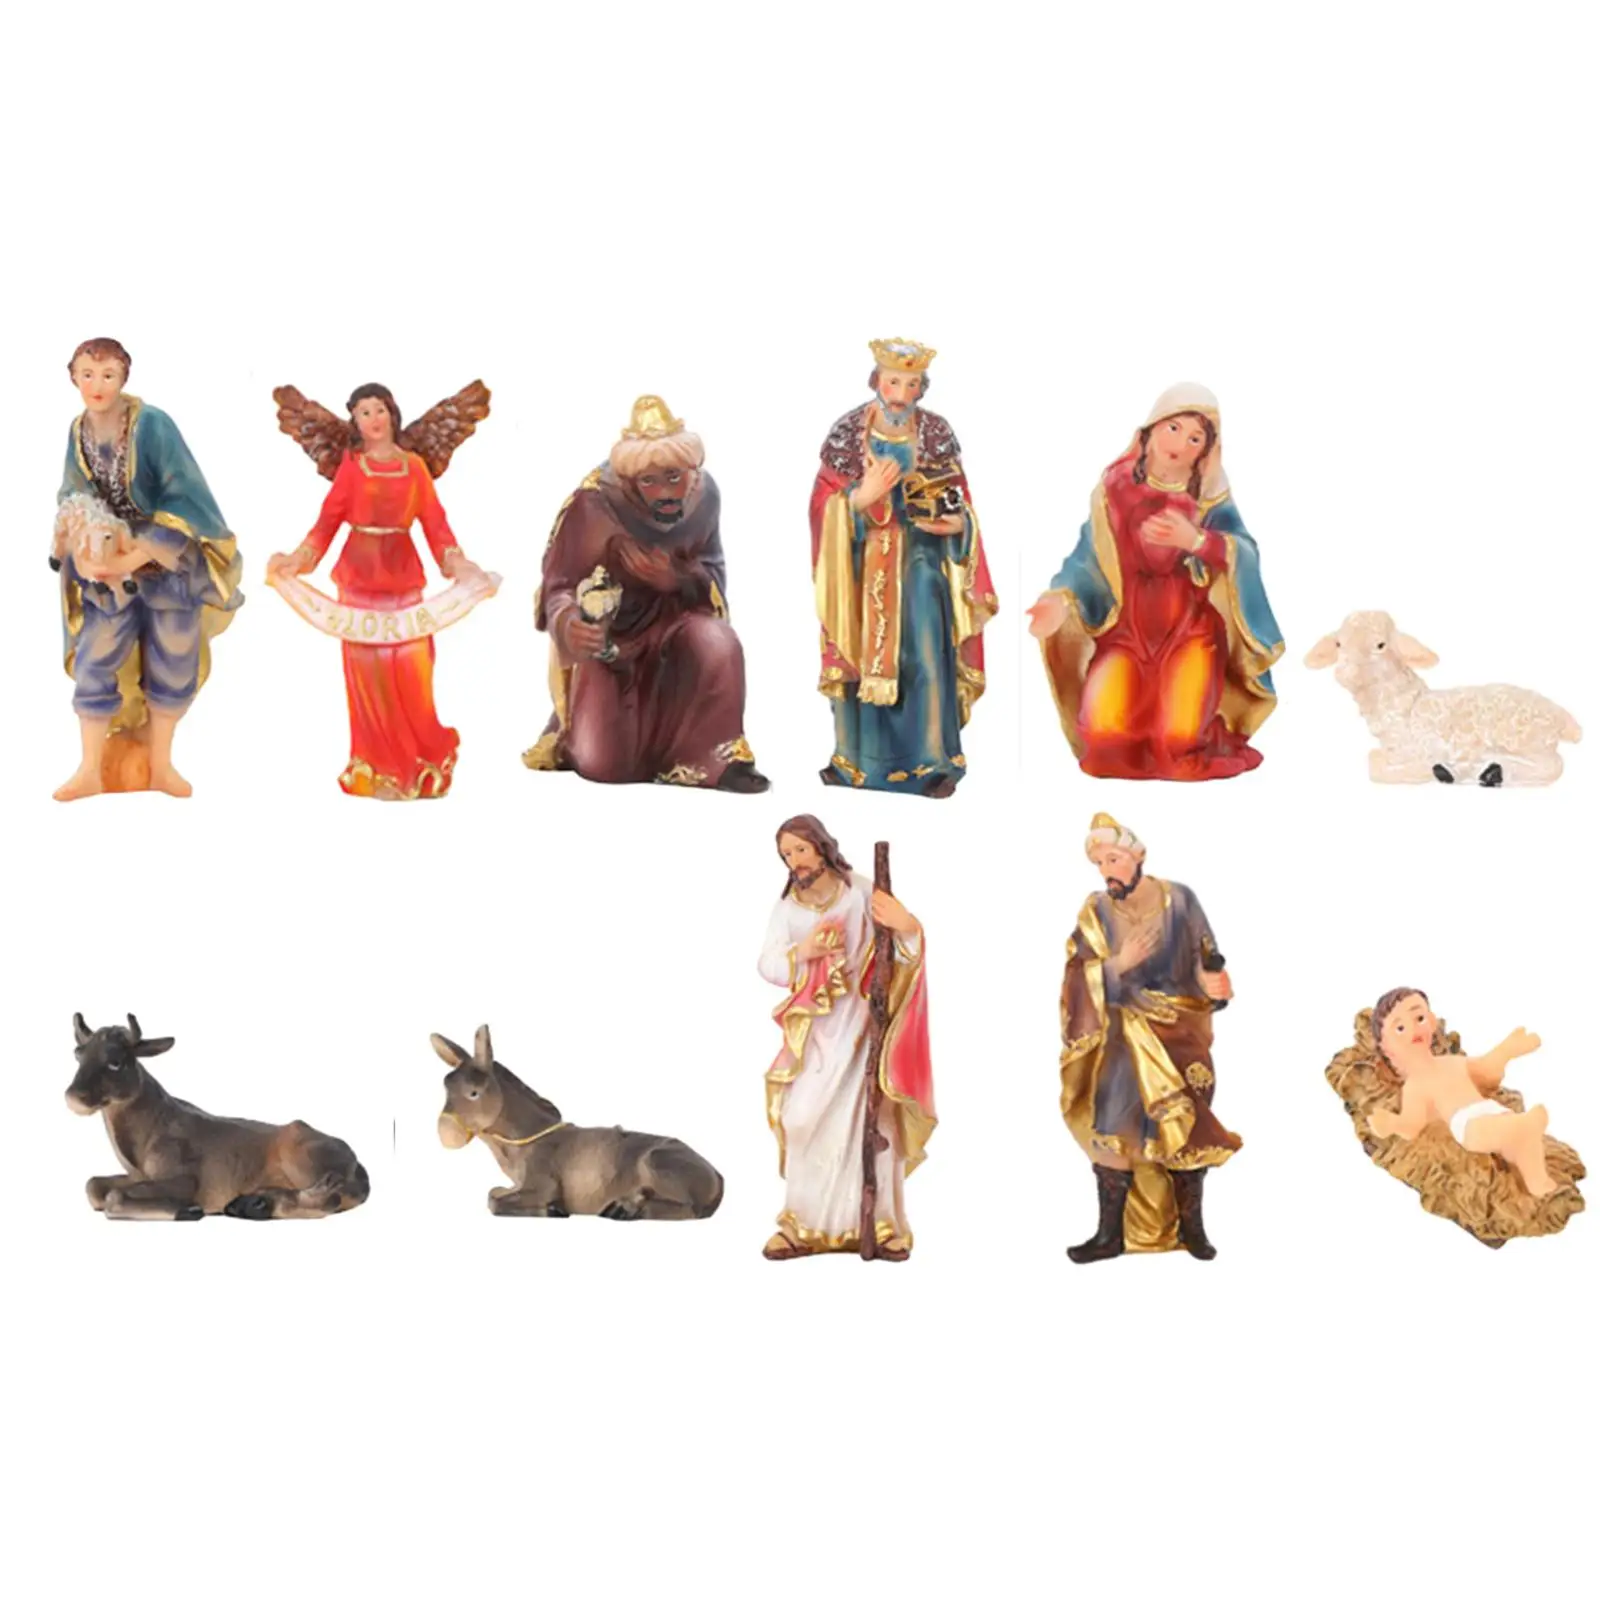 11 Pieces Nativity Scene Figurines Christmas Birth of Jesus Statue Set for Home Office Table Centerpiece Shelf Apartment